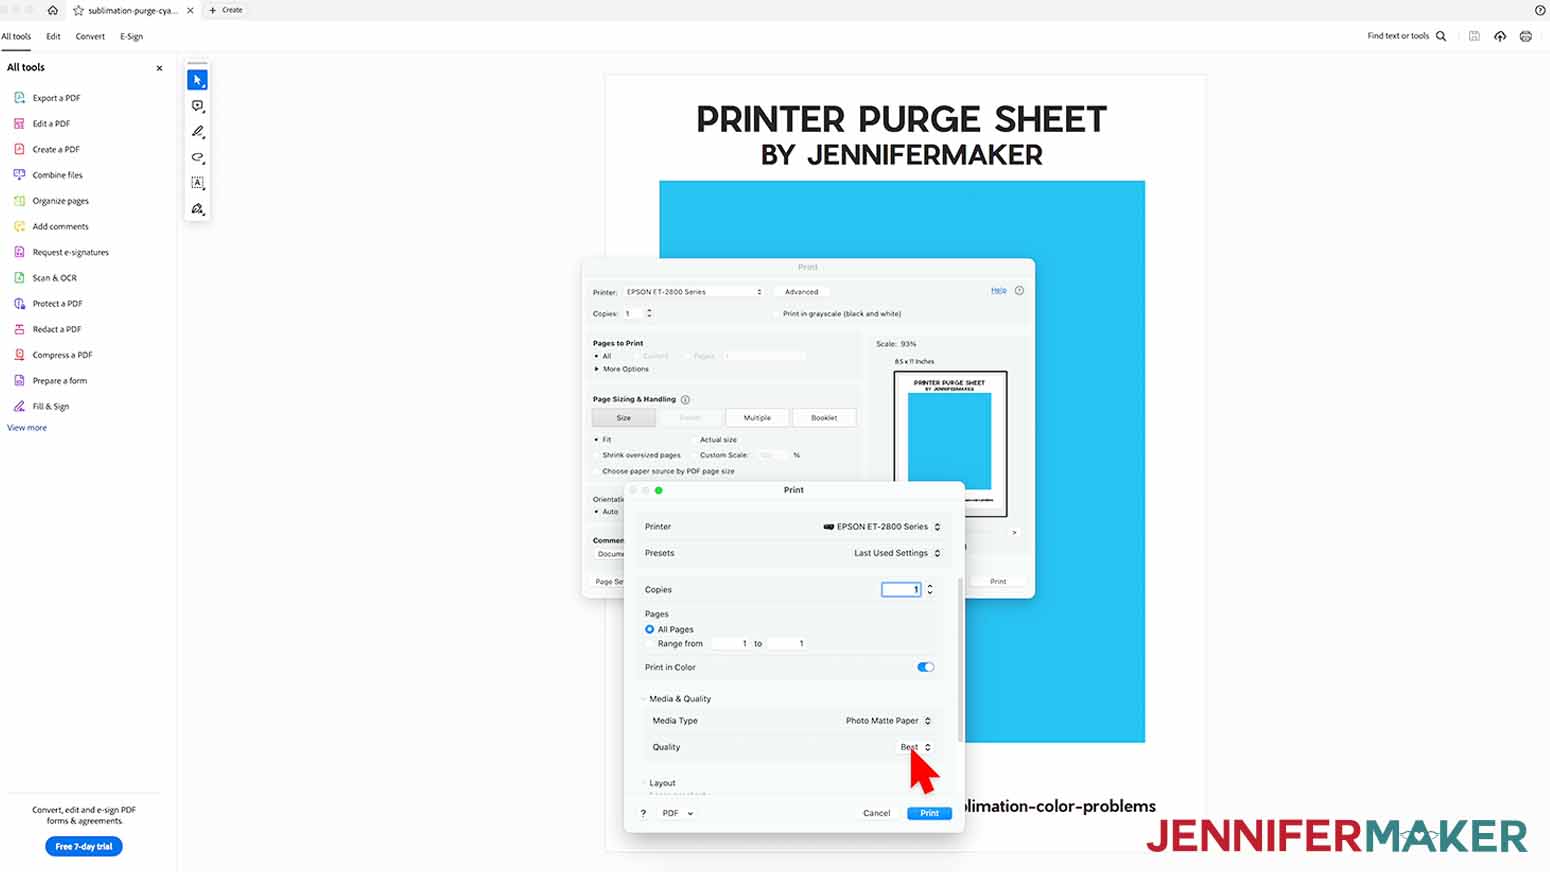 In the Print dialog box, make sure your sublimation printer is selected in the printer dropdown menu and that the design is set to print using color ink. Adjust the controls to your usual sublimation settings. Use the best quality options available.